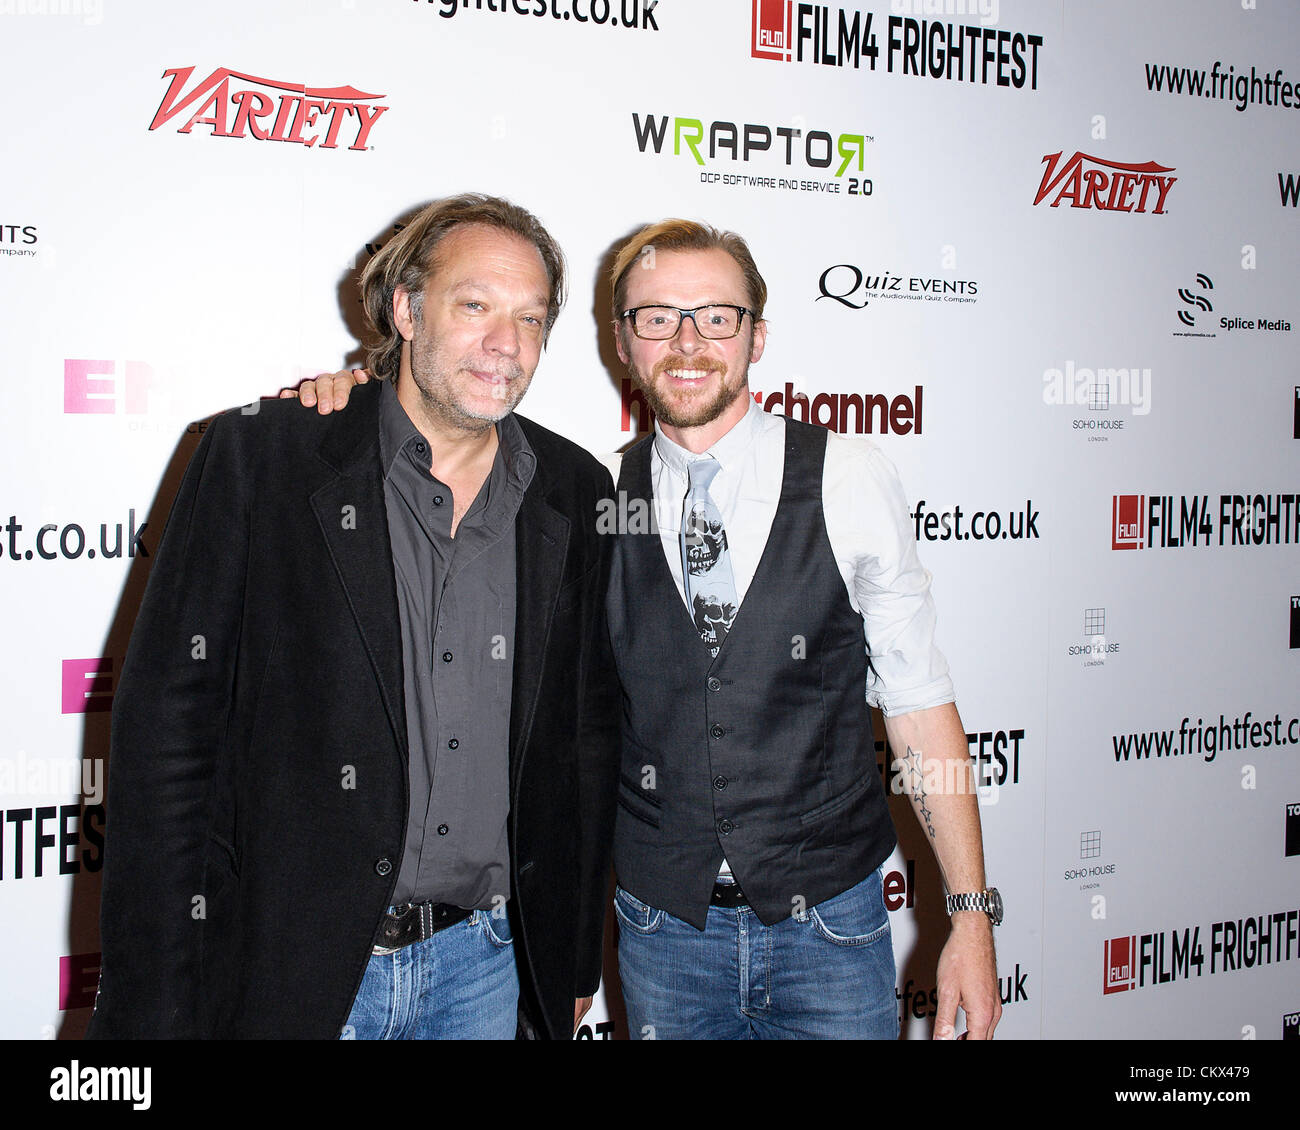 25 August 2012. Greg Nicotero  receives the inaugural Variety FrightFest Award at Frightfest the 13th at The Empire, Leicester Square, London. Persons pictured: Simon Pegg and Greg Nicotero. Gregory Nicotero (born March 15, 1963) is an American special effects creator, actor, and director. The award was presented by Simon Pegg following an Interview with Damon Wise.. Picture by Julie Edwards Stock Photo